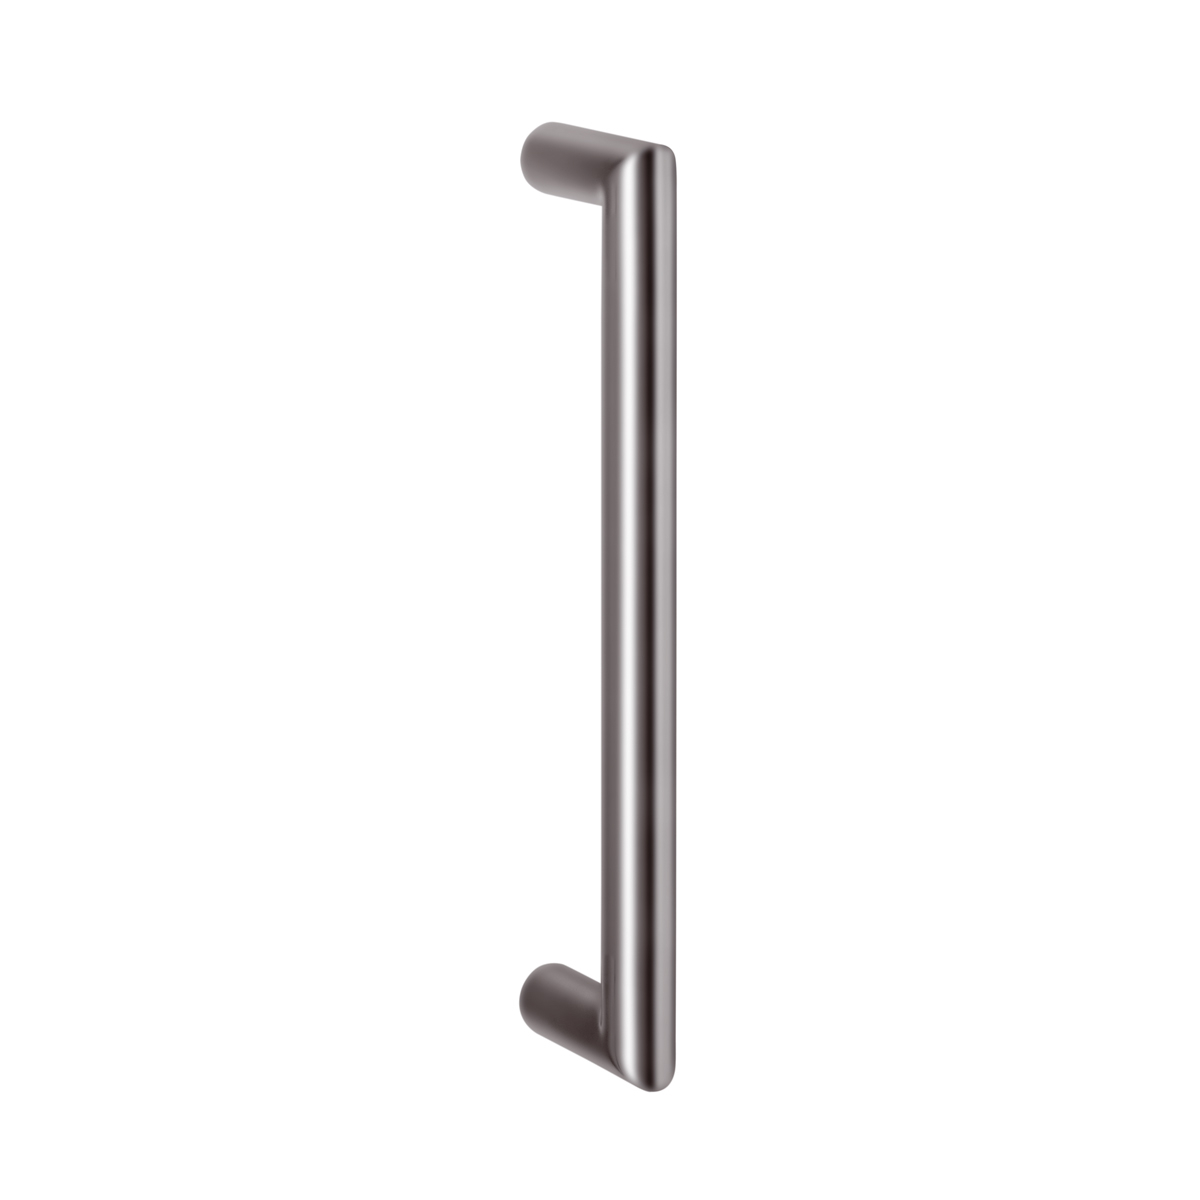 Entrance Pull Handle Stainless Steel Back To Back Fixing J103